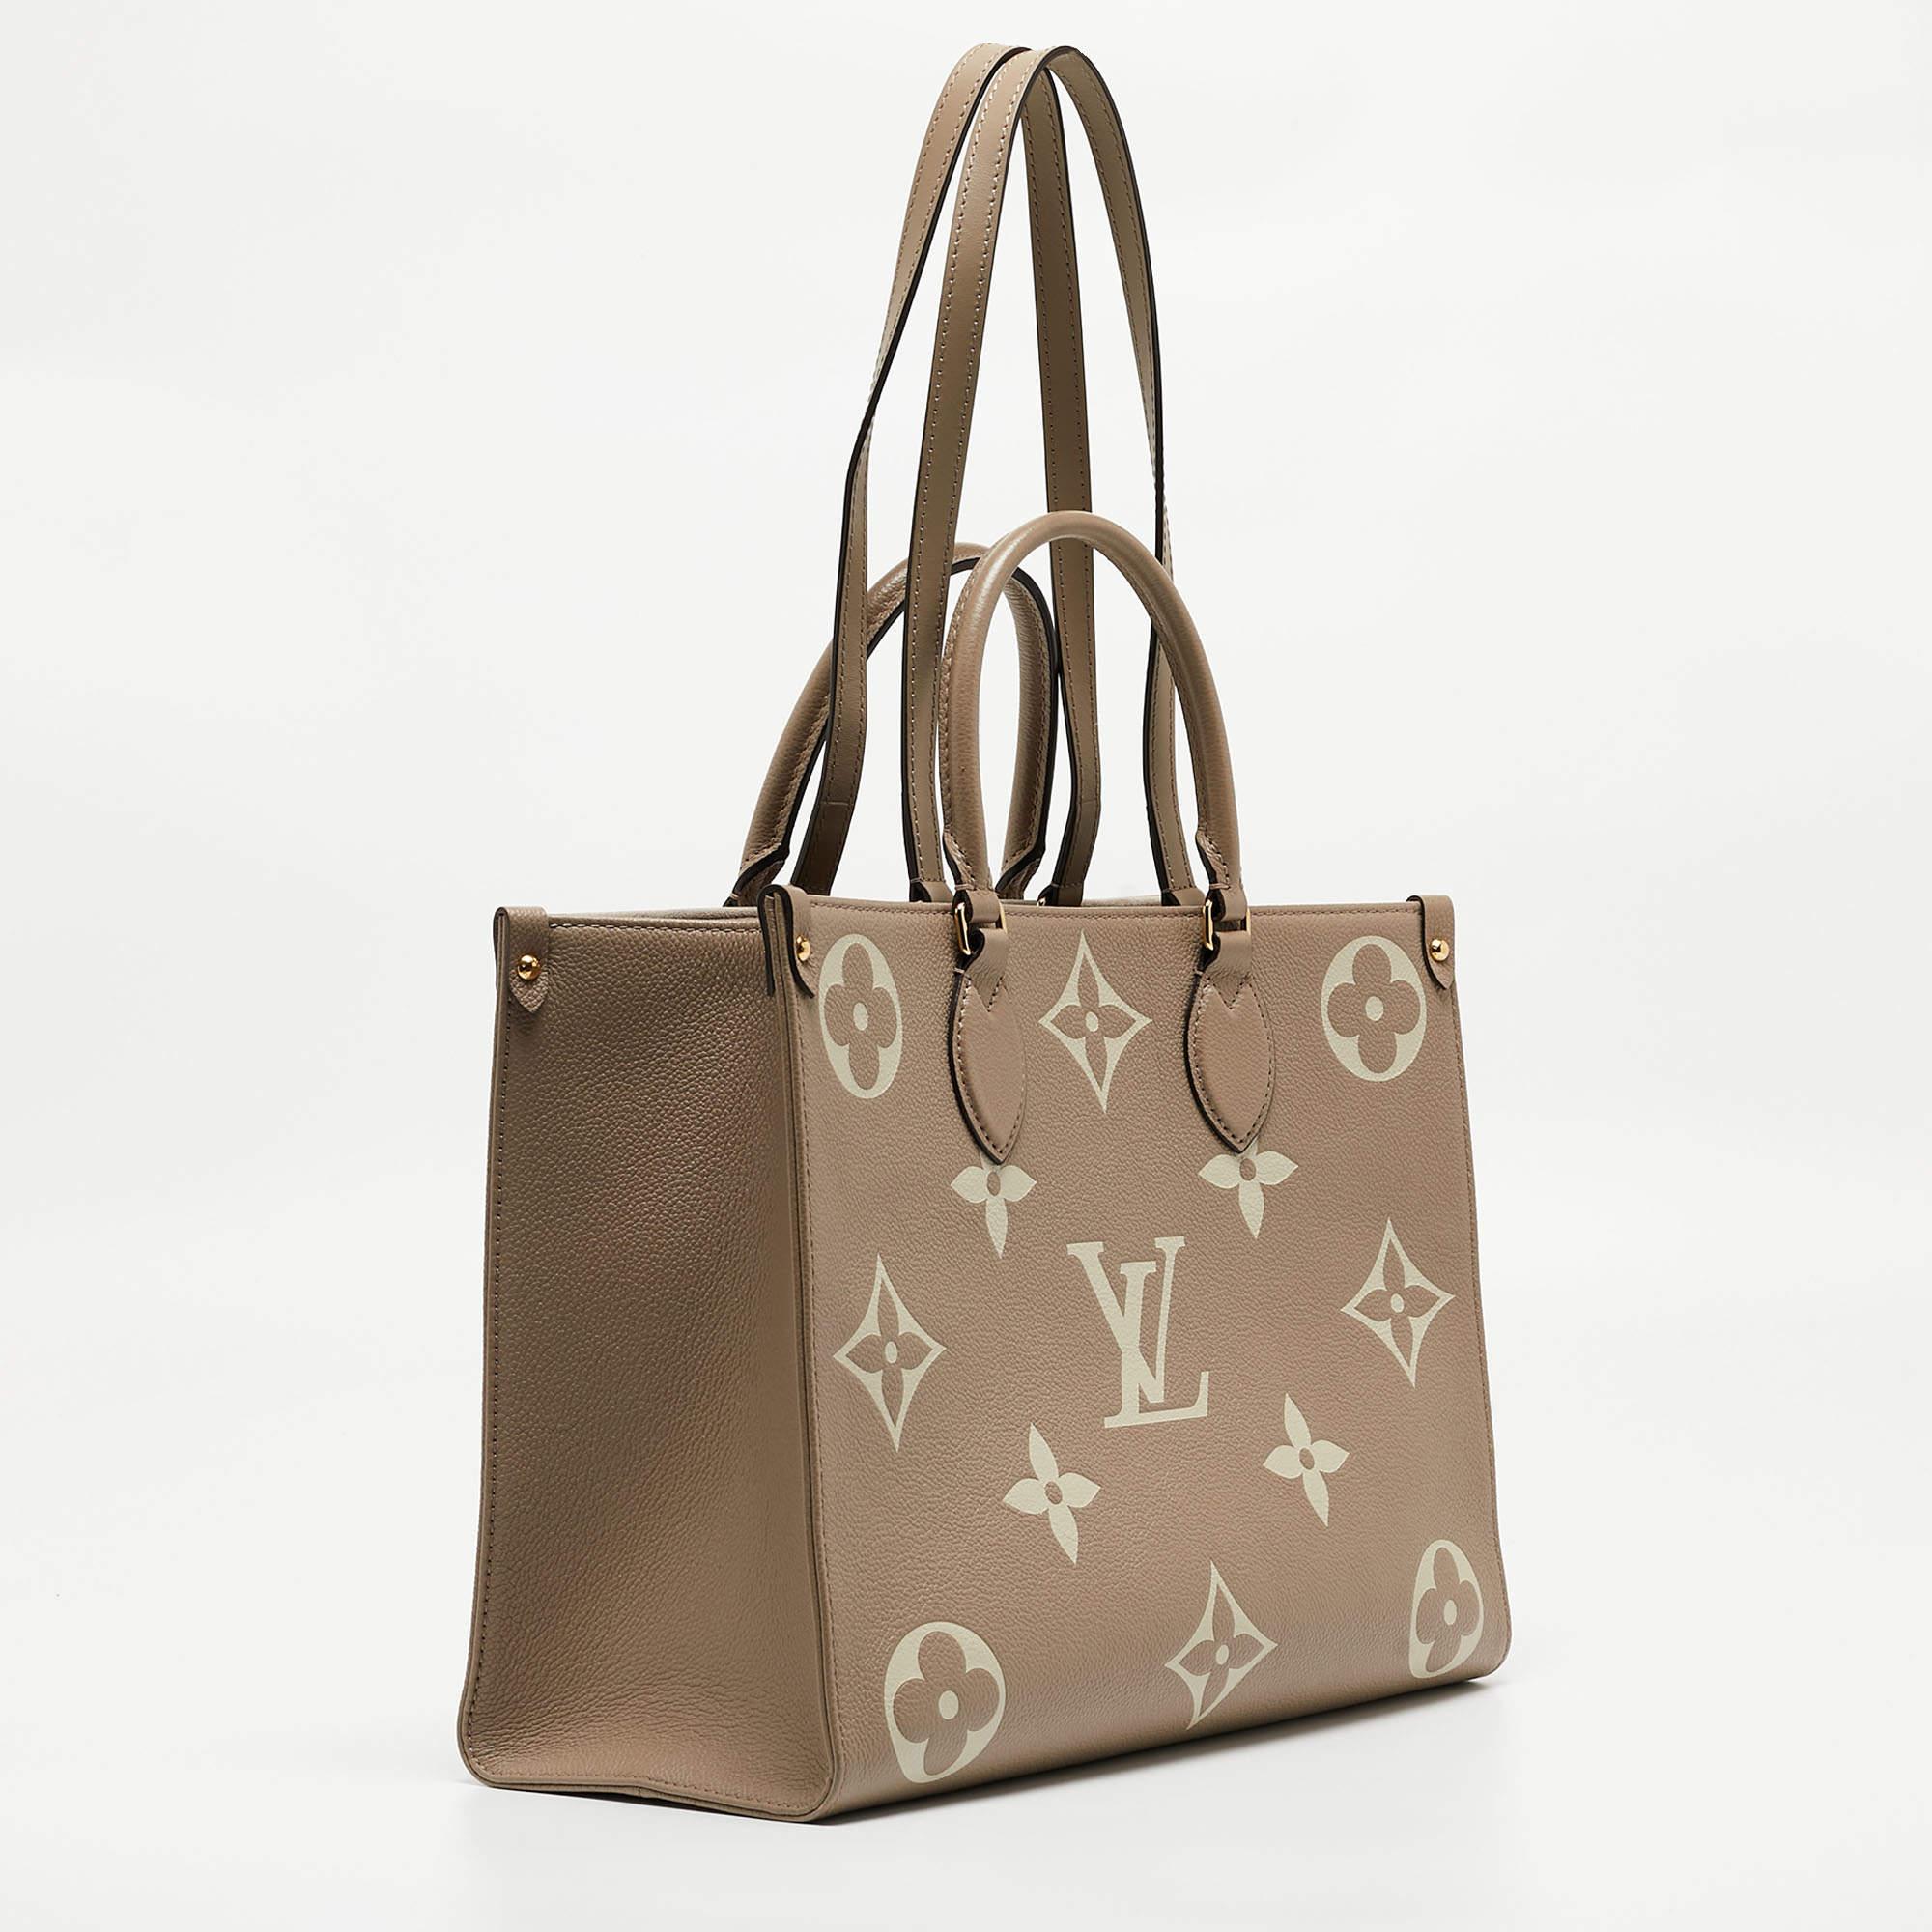 From Louis Vuitton’s Monogram Giant capsule collection comes this Onthego bag that presents the iconic pattern in a new style. It features the signature logo and flower motifs in a super-sized format. This creation is a structured tote with an